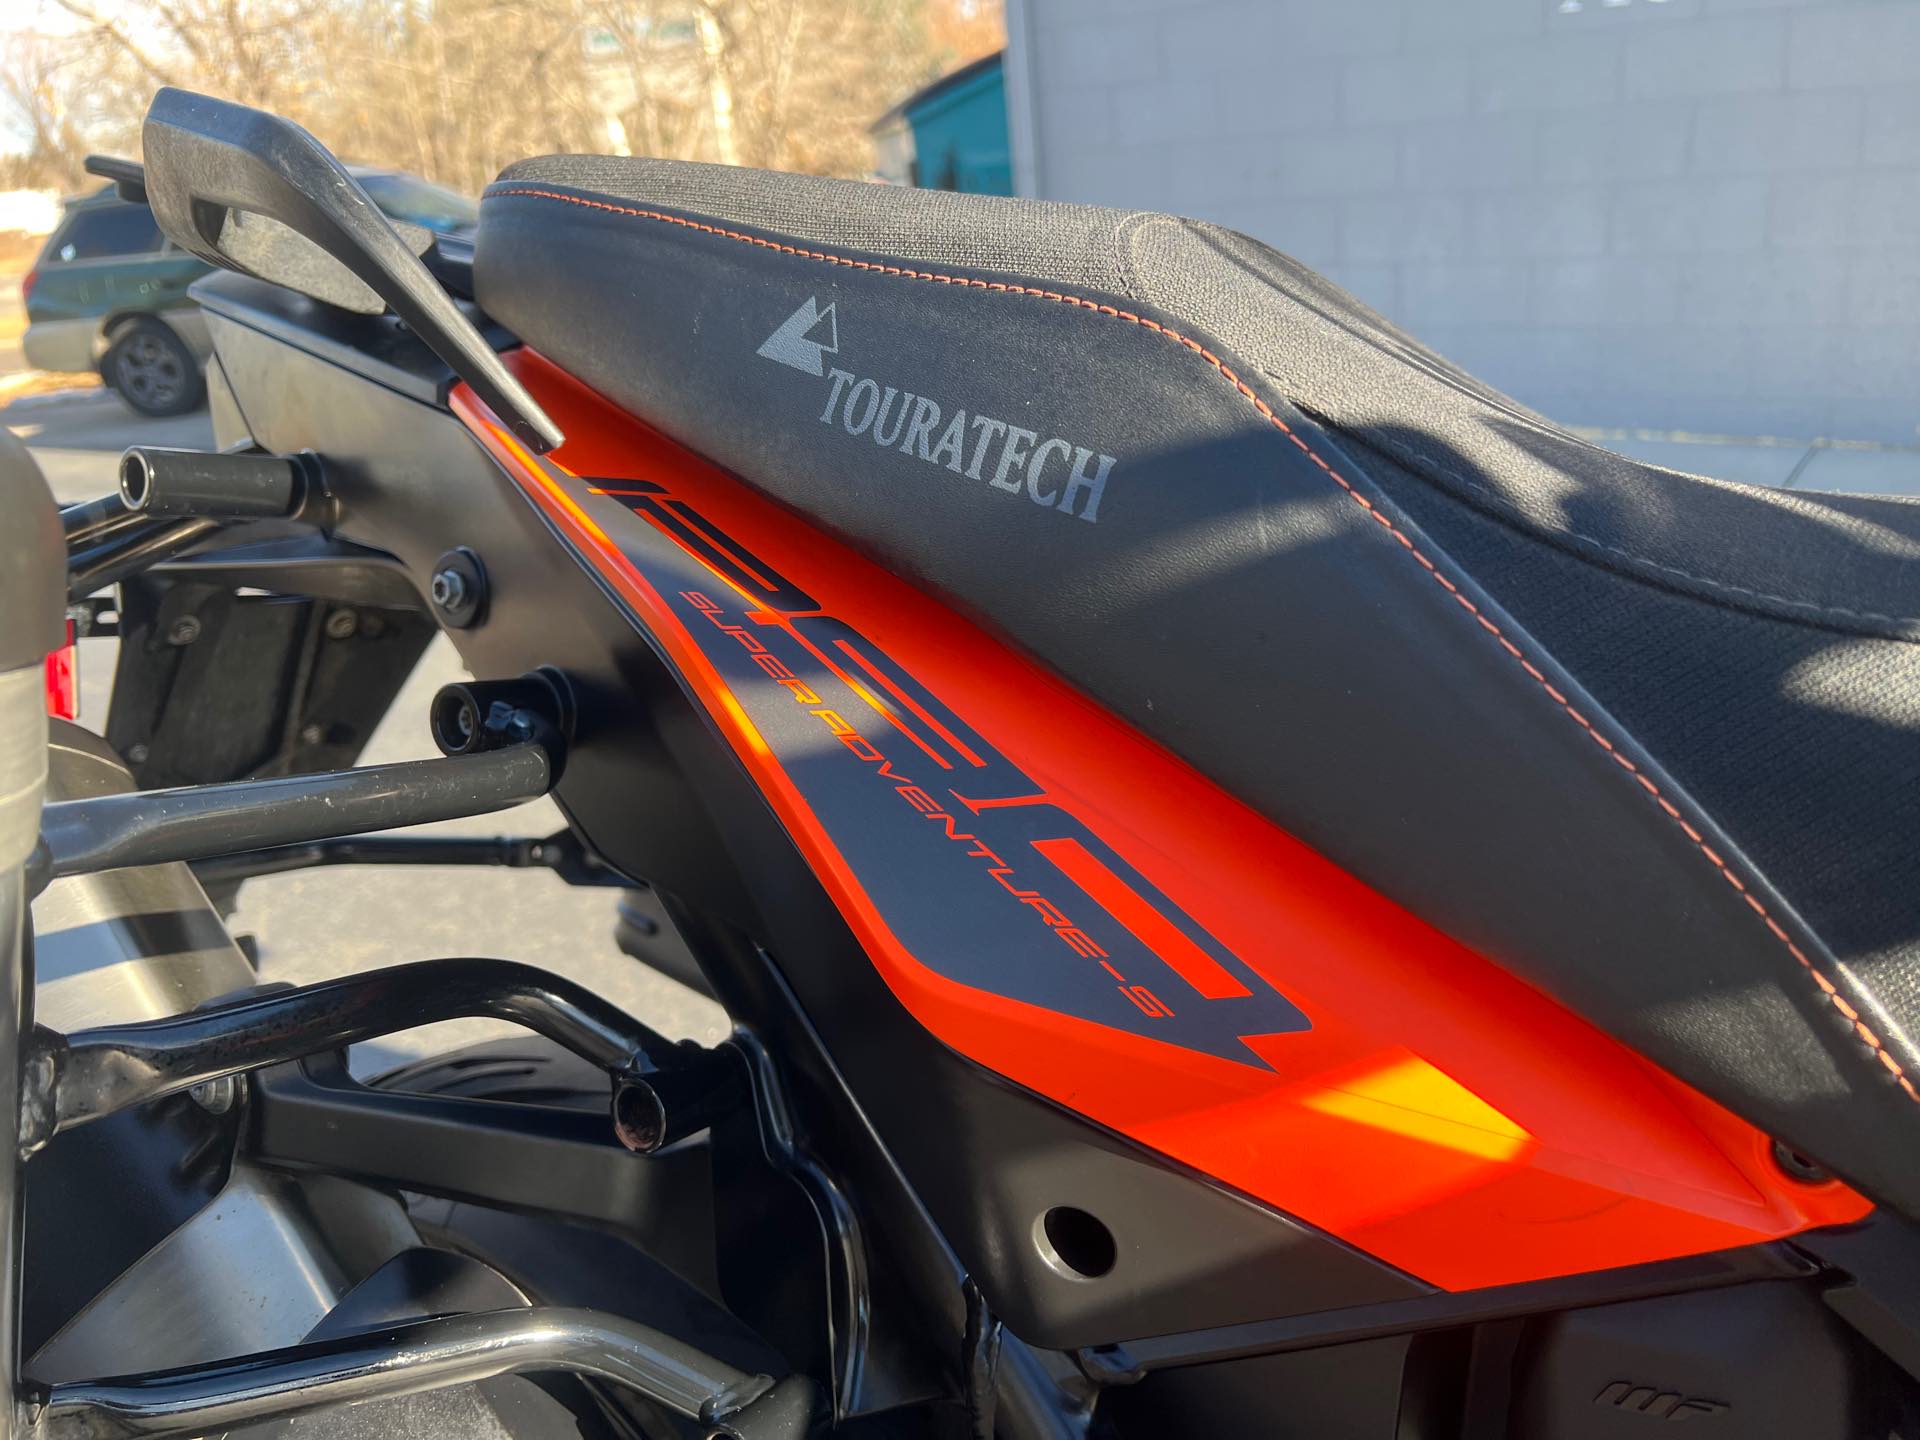 2019 KTM Super Adventure 1290 S at Aces Motorcycles - Fort Collins